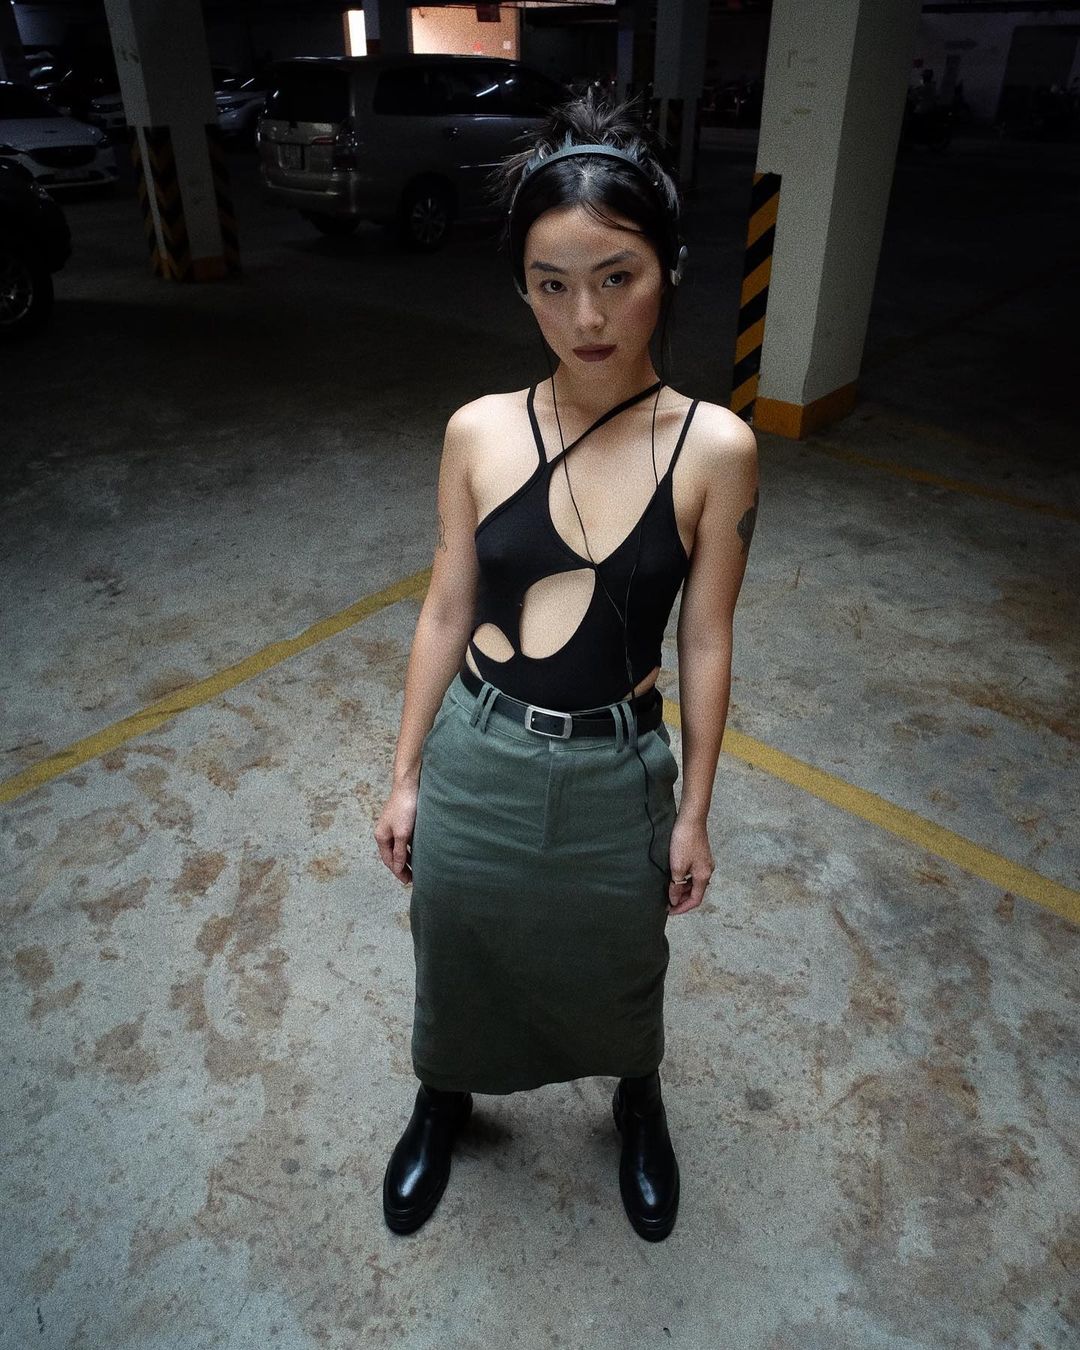 The bodysuit has become even bolder with improvised cut-outs.